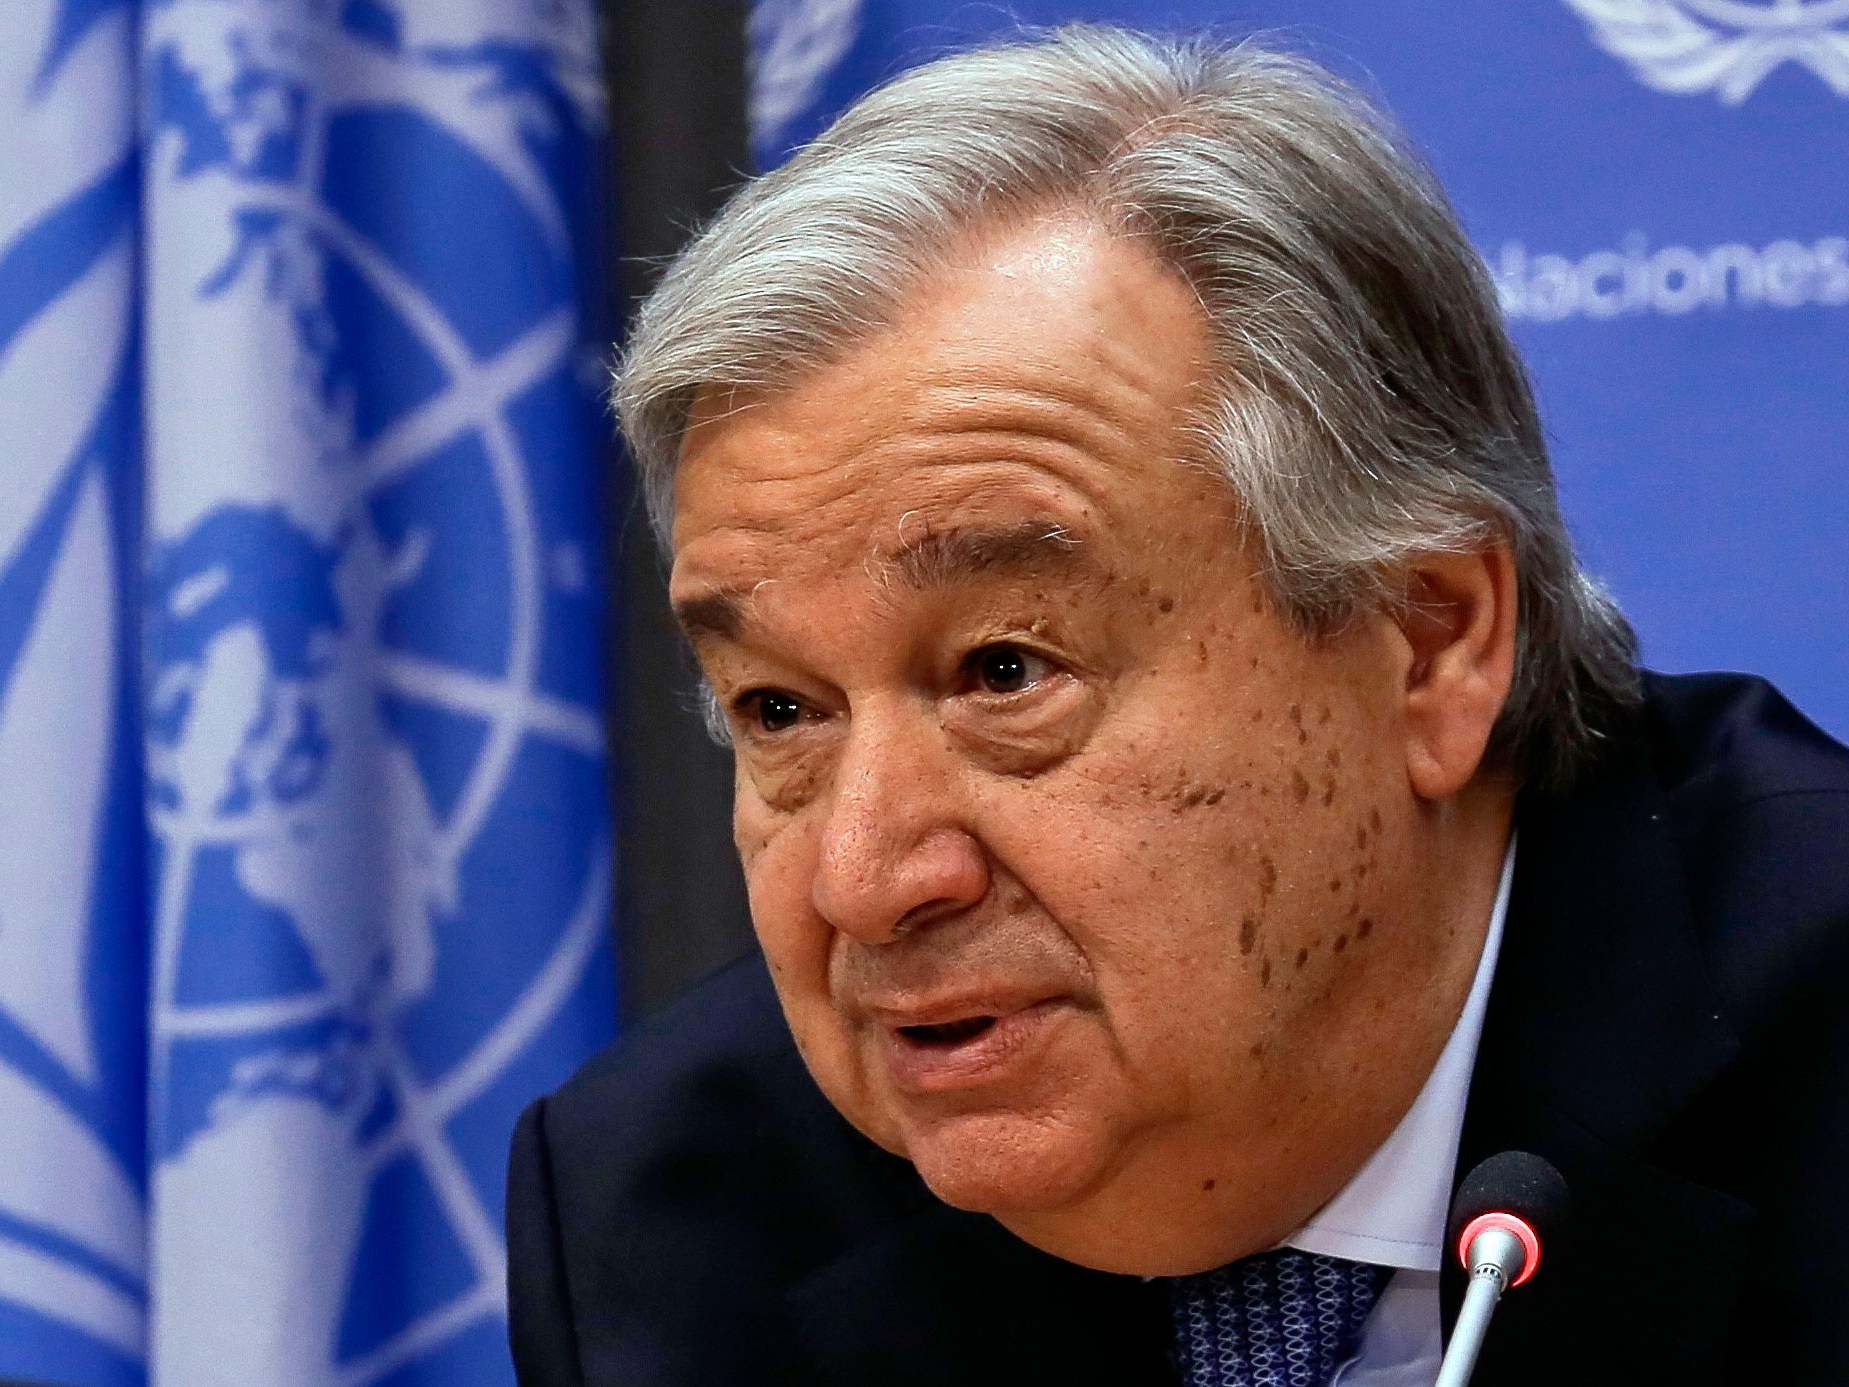 UN to run out of money by end of month, secretary general warns